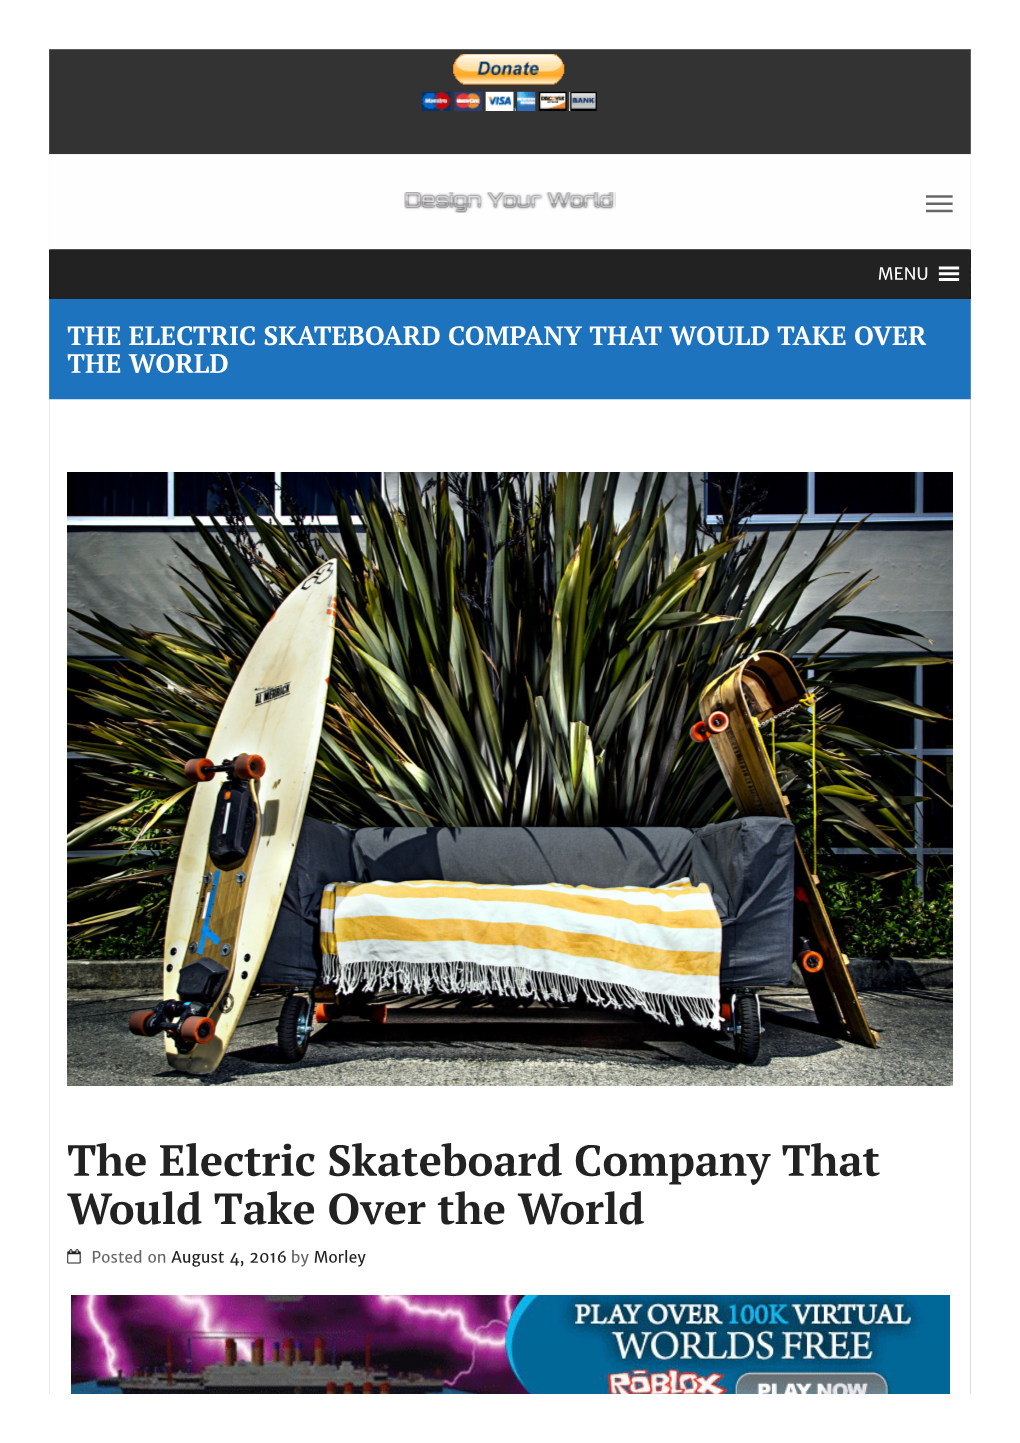 The Electric Skateboard Company That Would Take Over the World